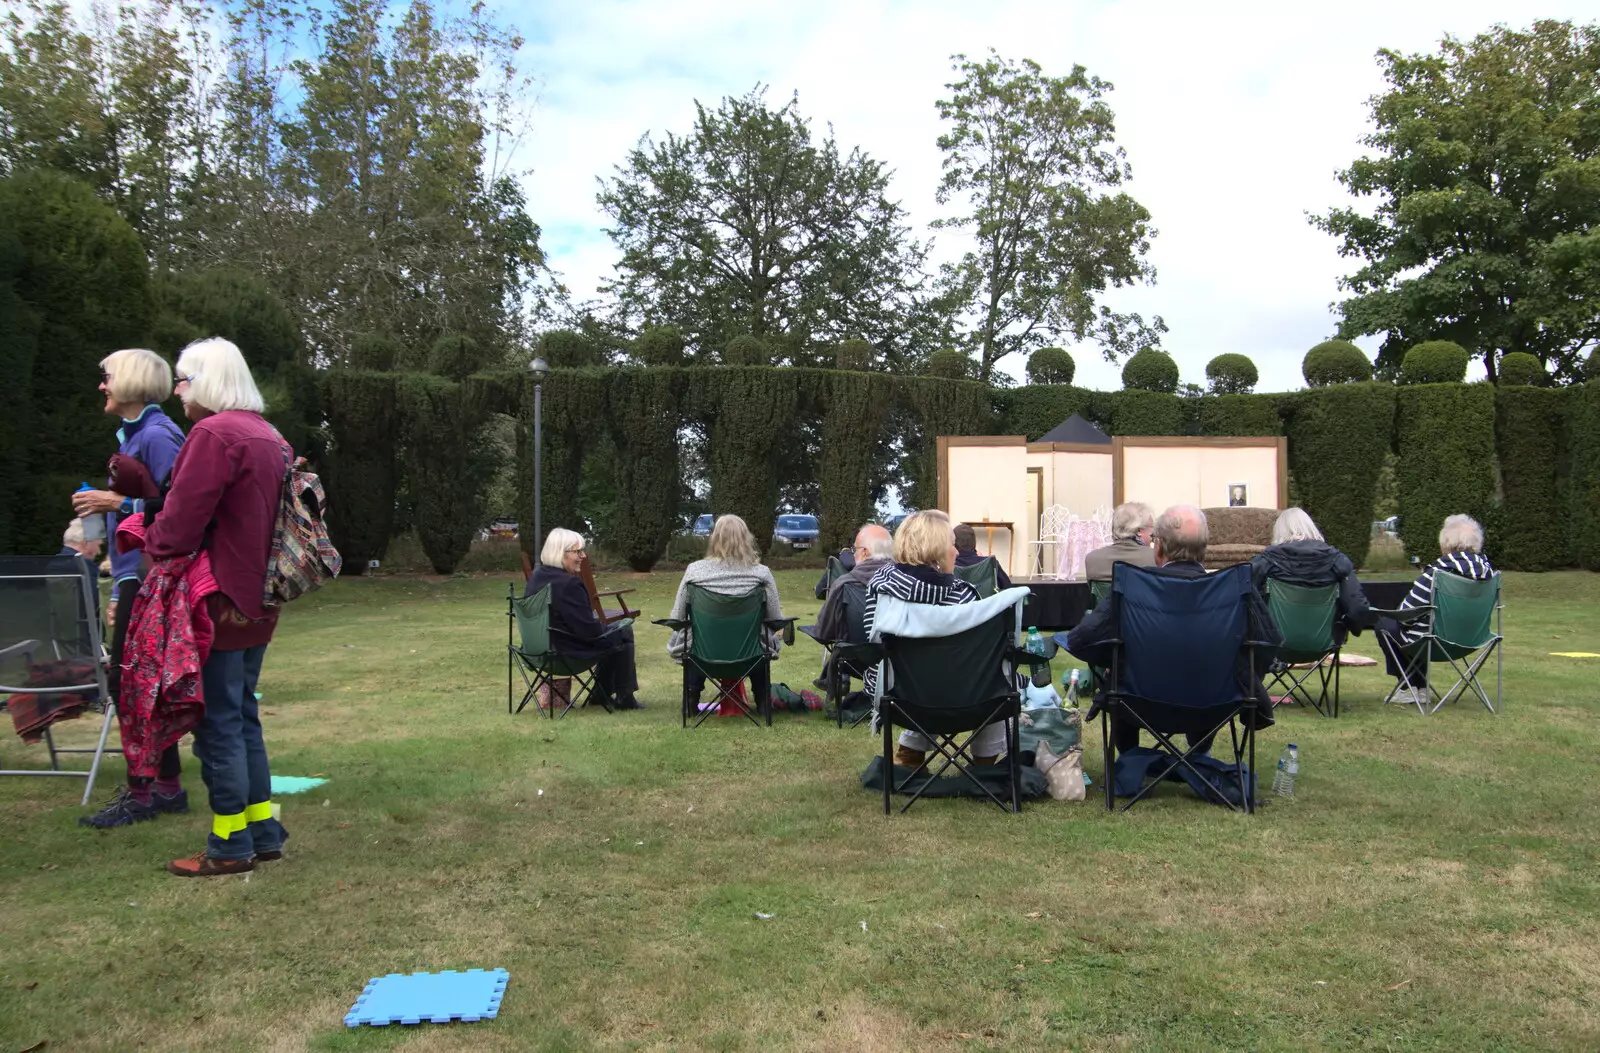 The audience starts to arrive, from Camping at Three Rivers, Geldeston, Norfolk - 5th September 2020